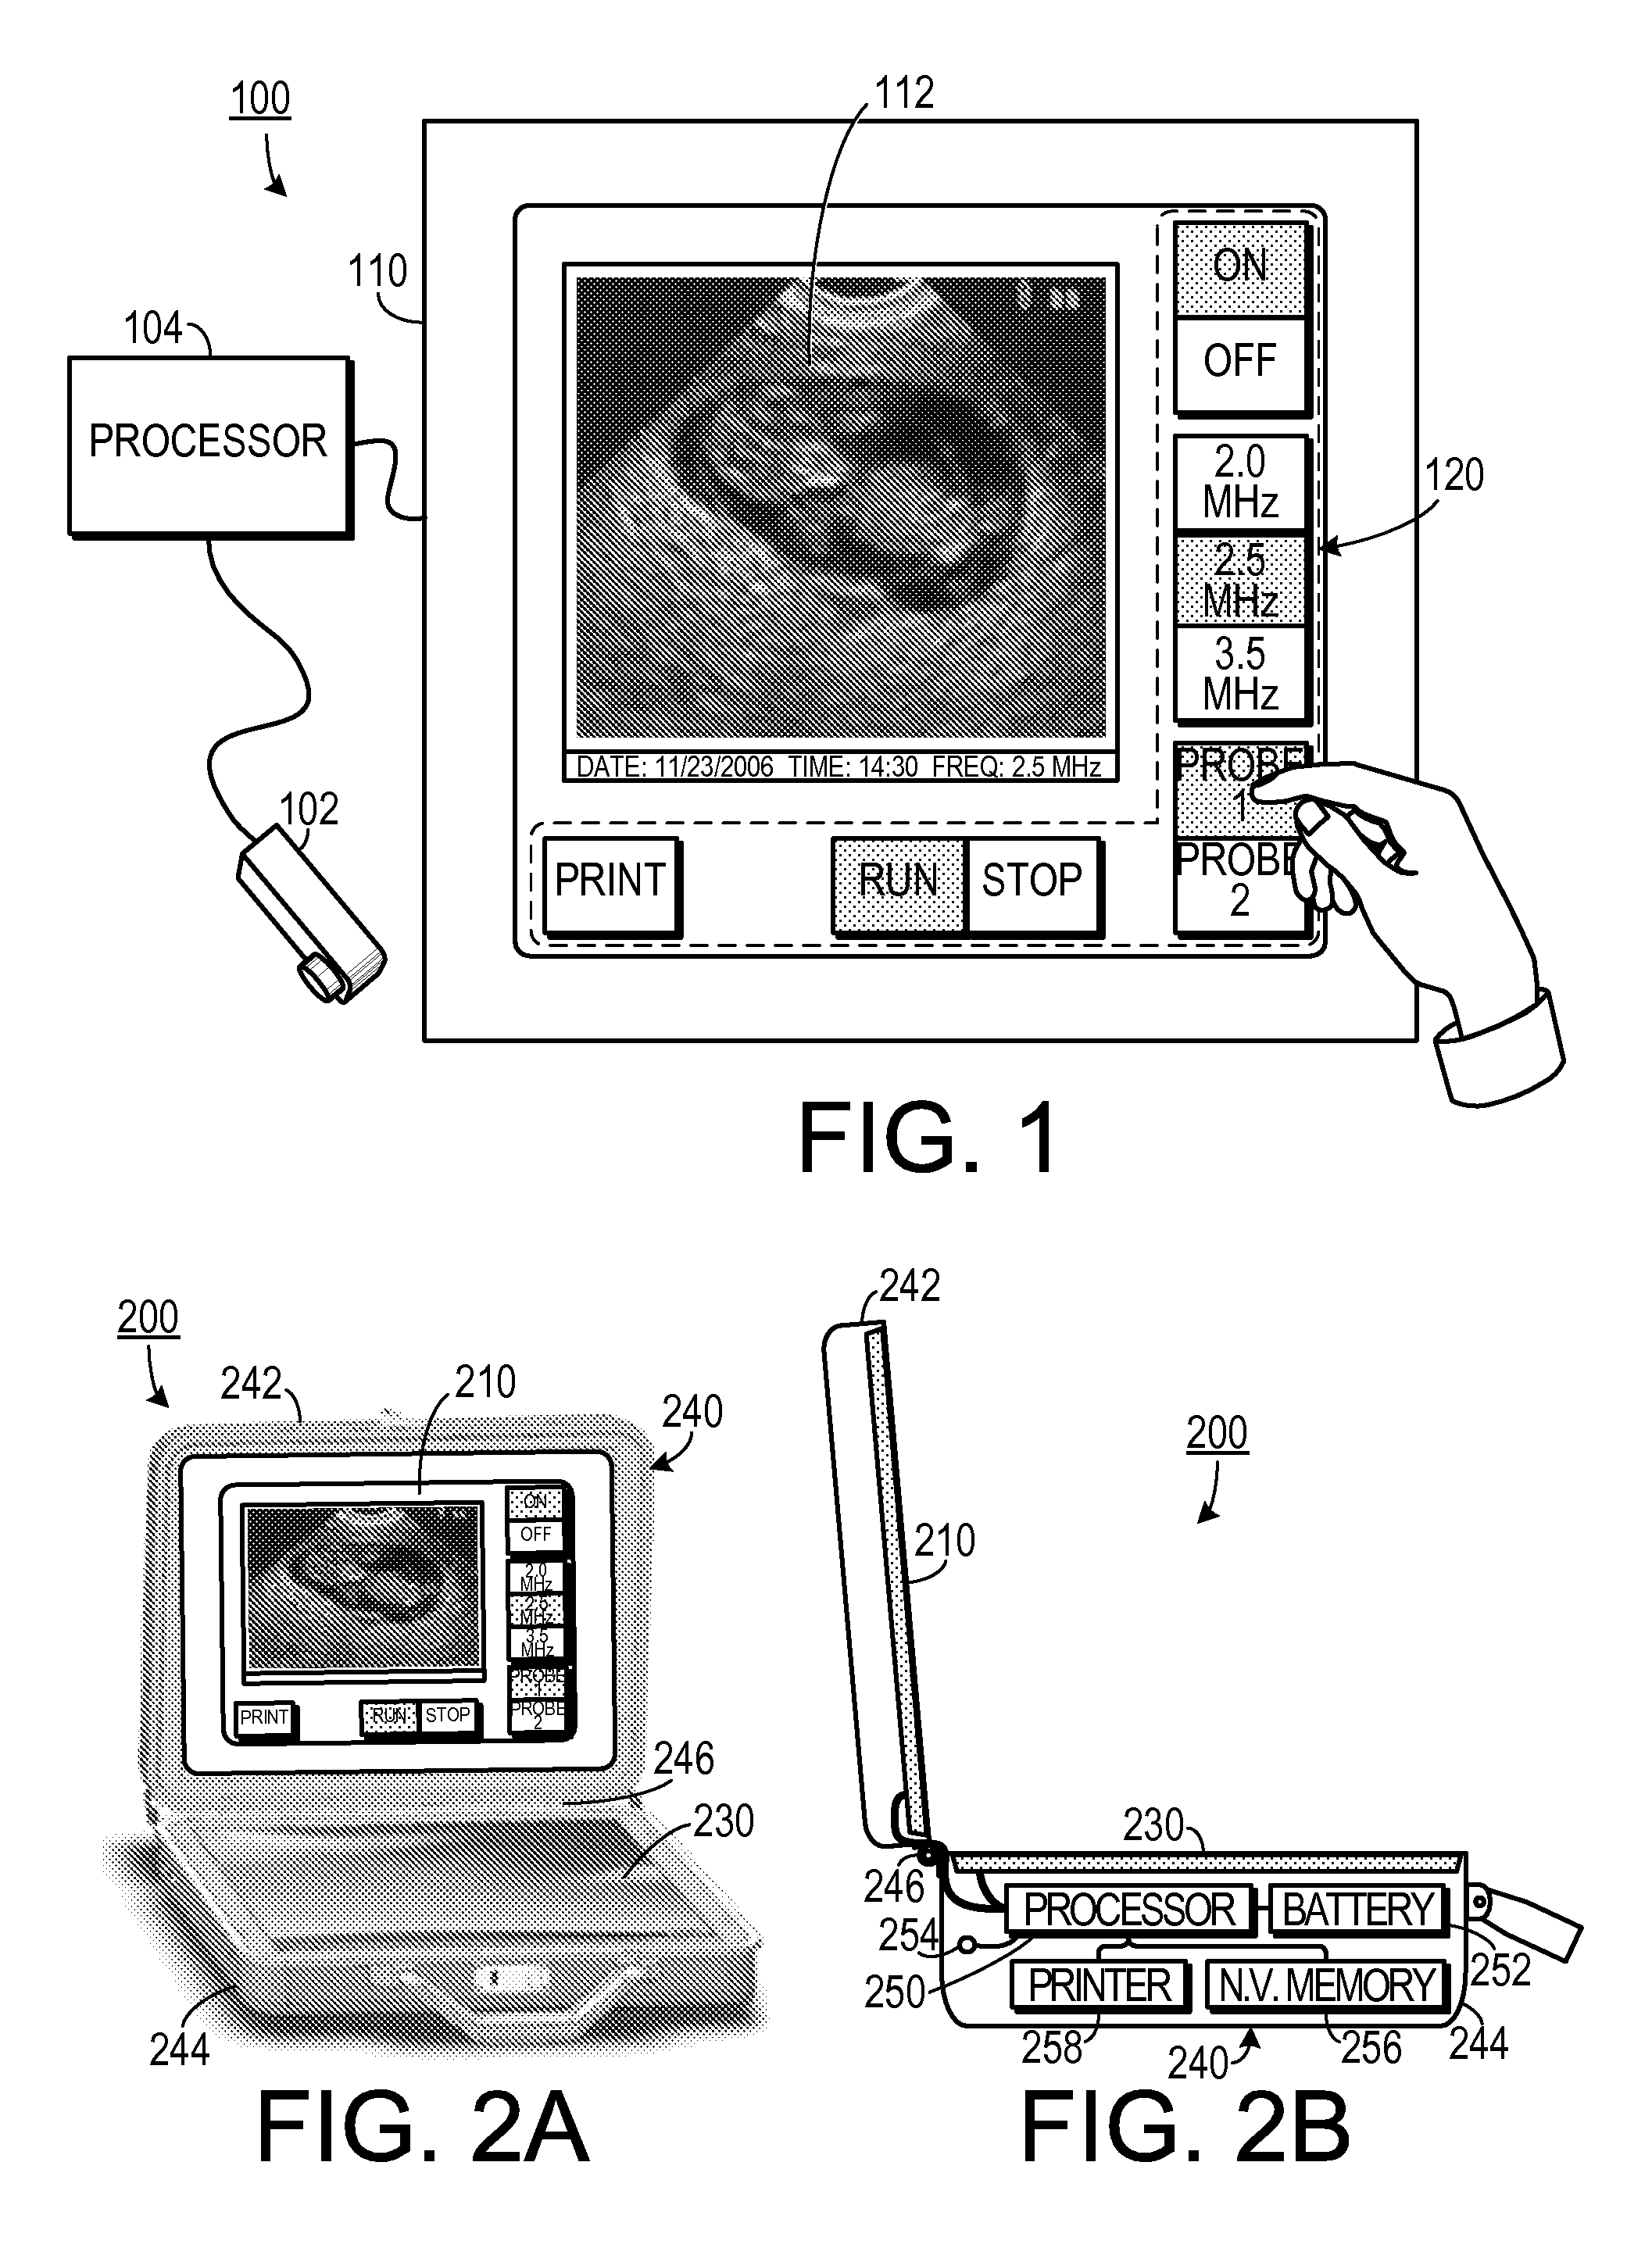 Portable ultrasound with touch screen interface